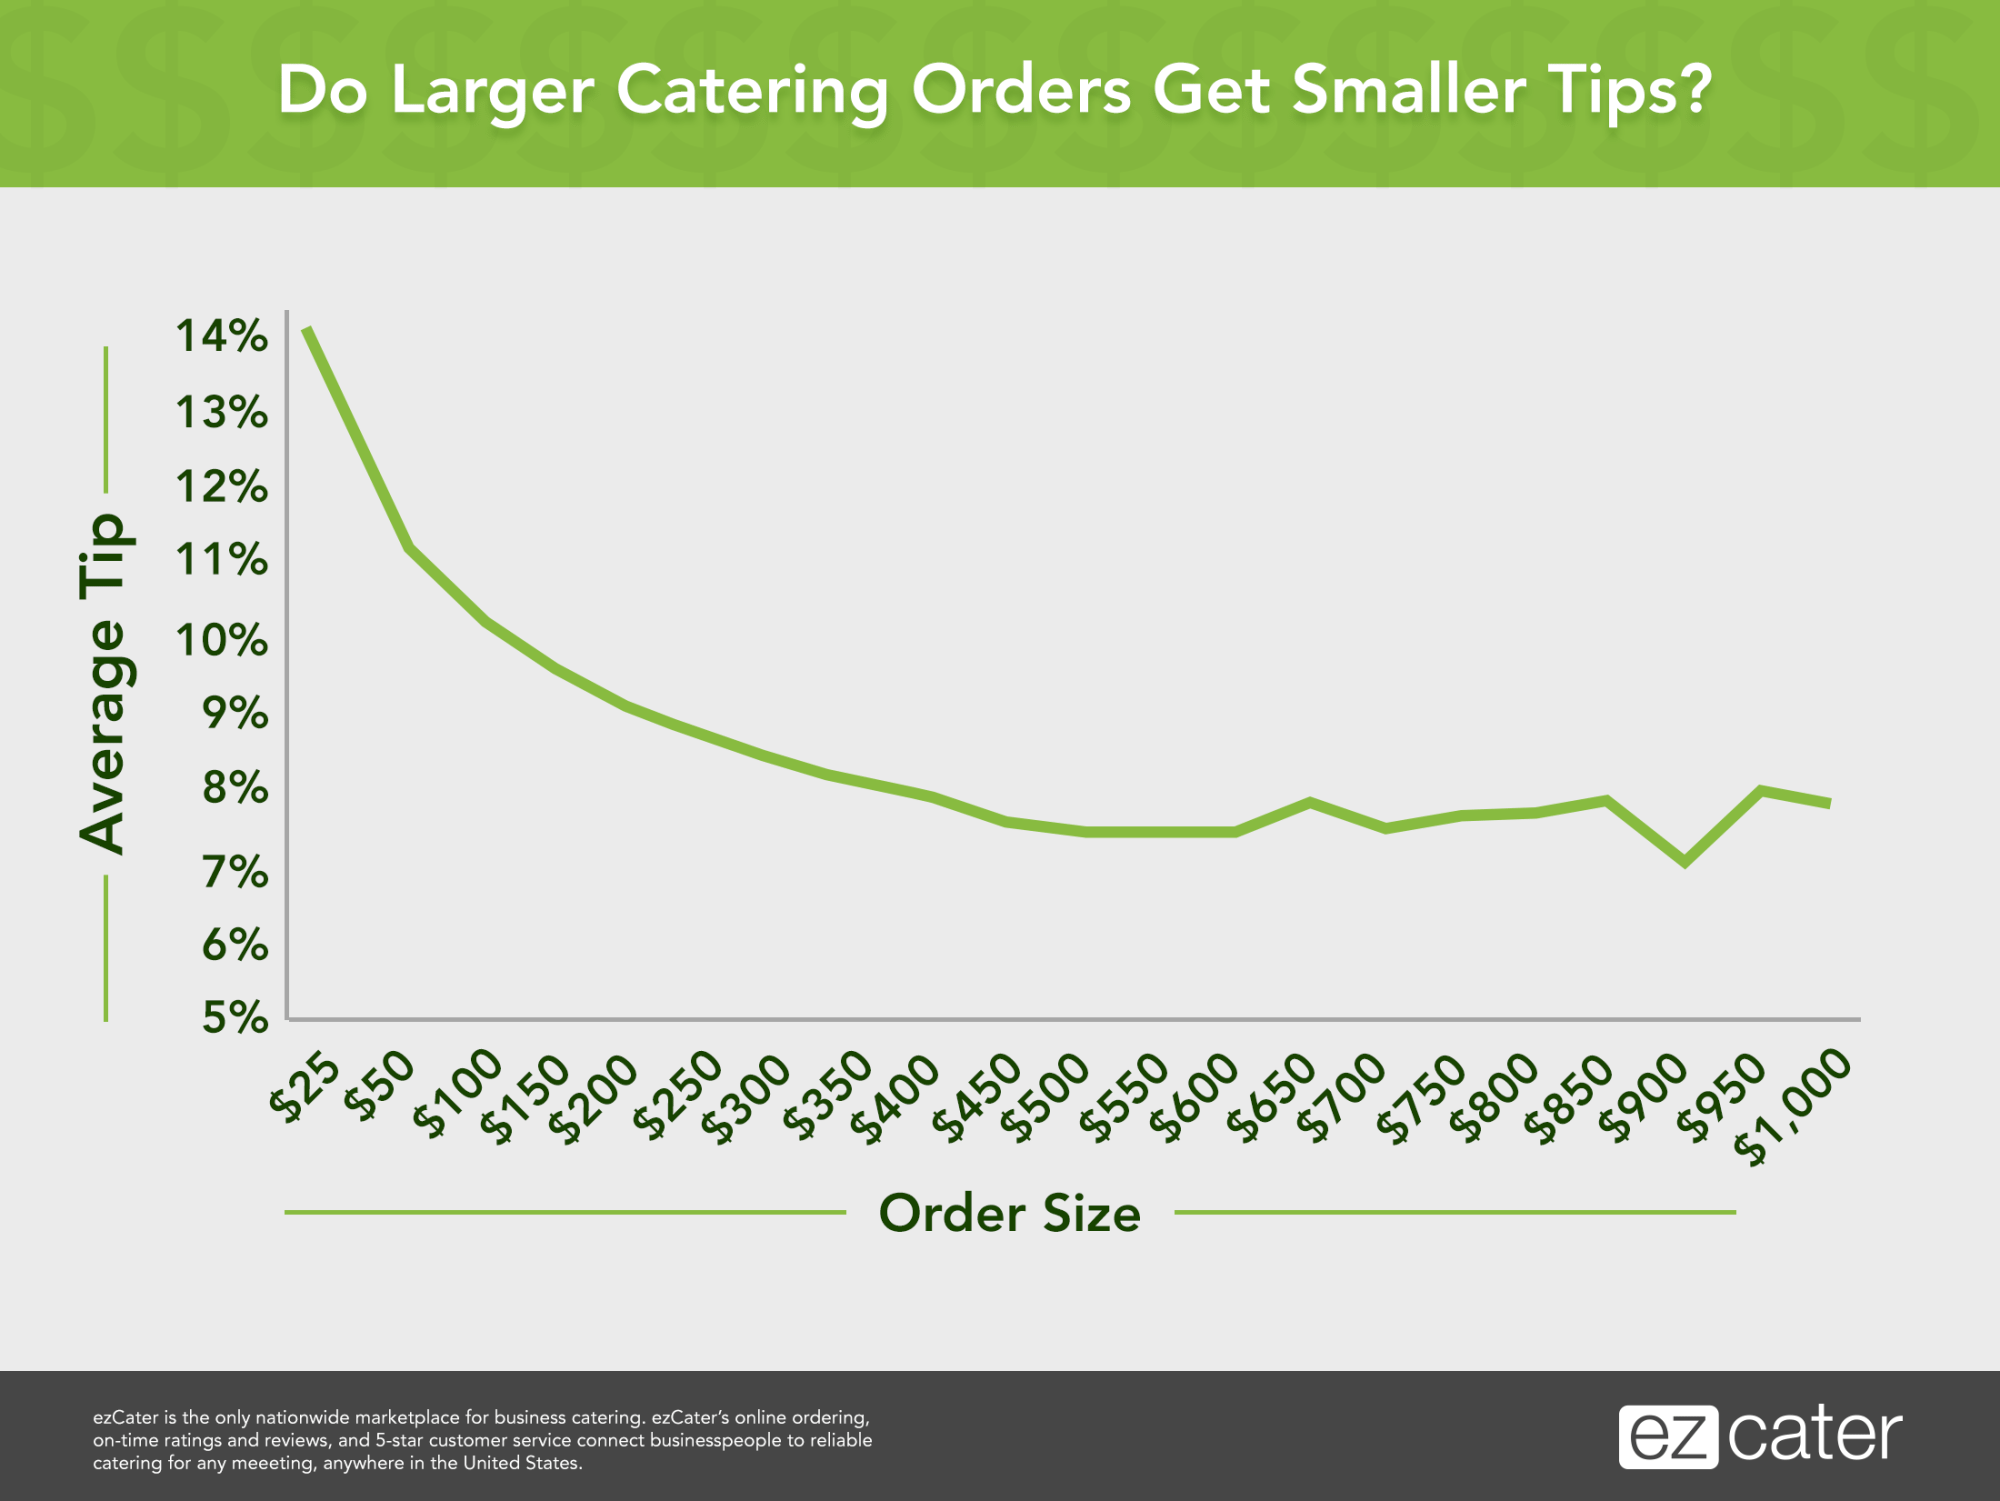 What to Tip on Large Catering Orders